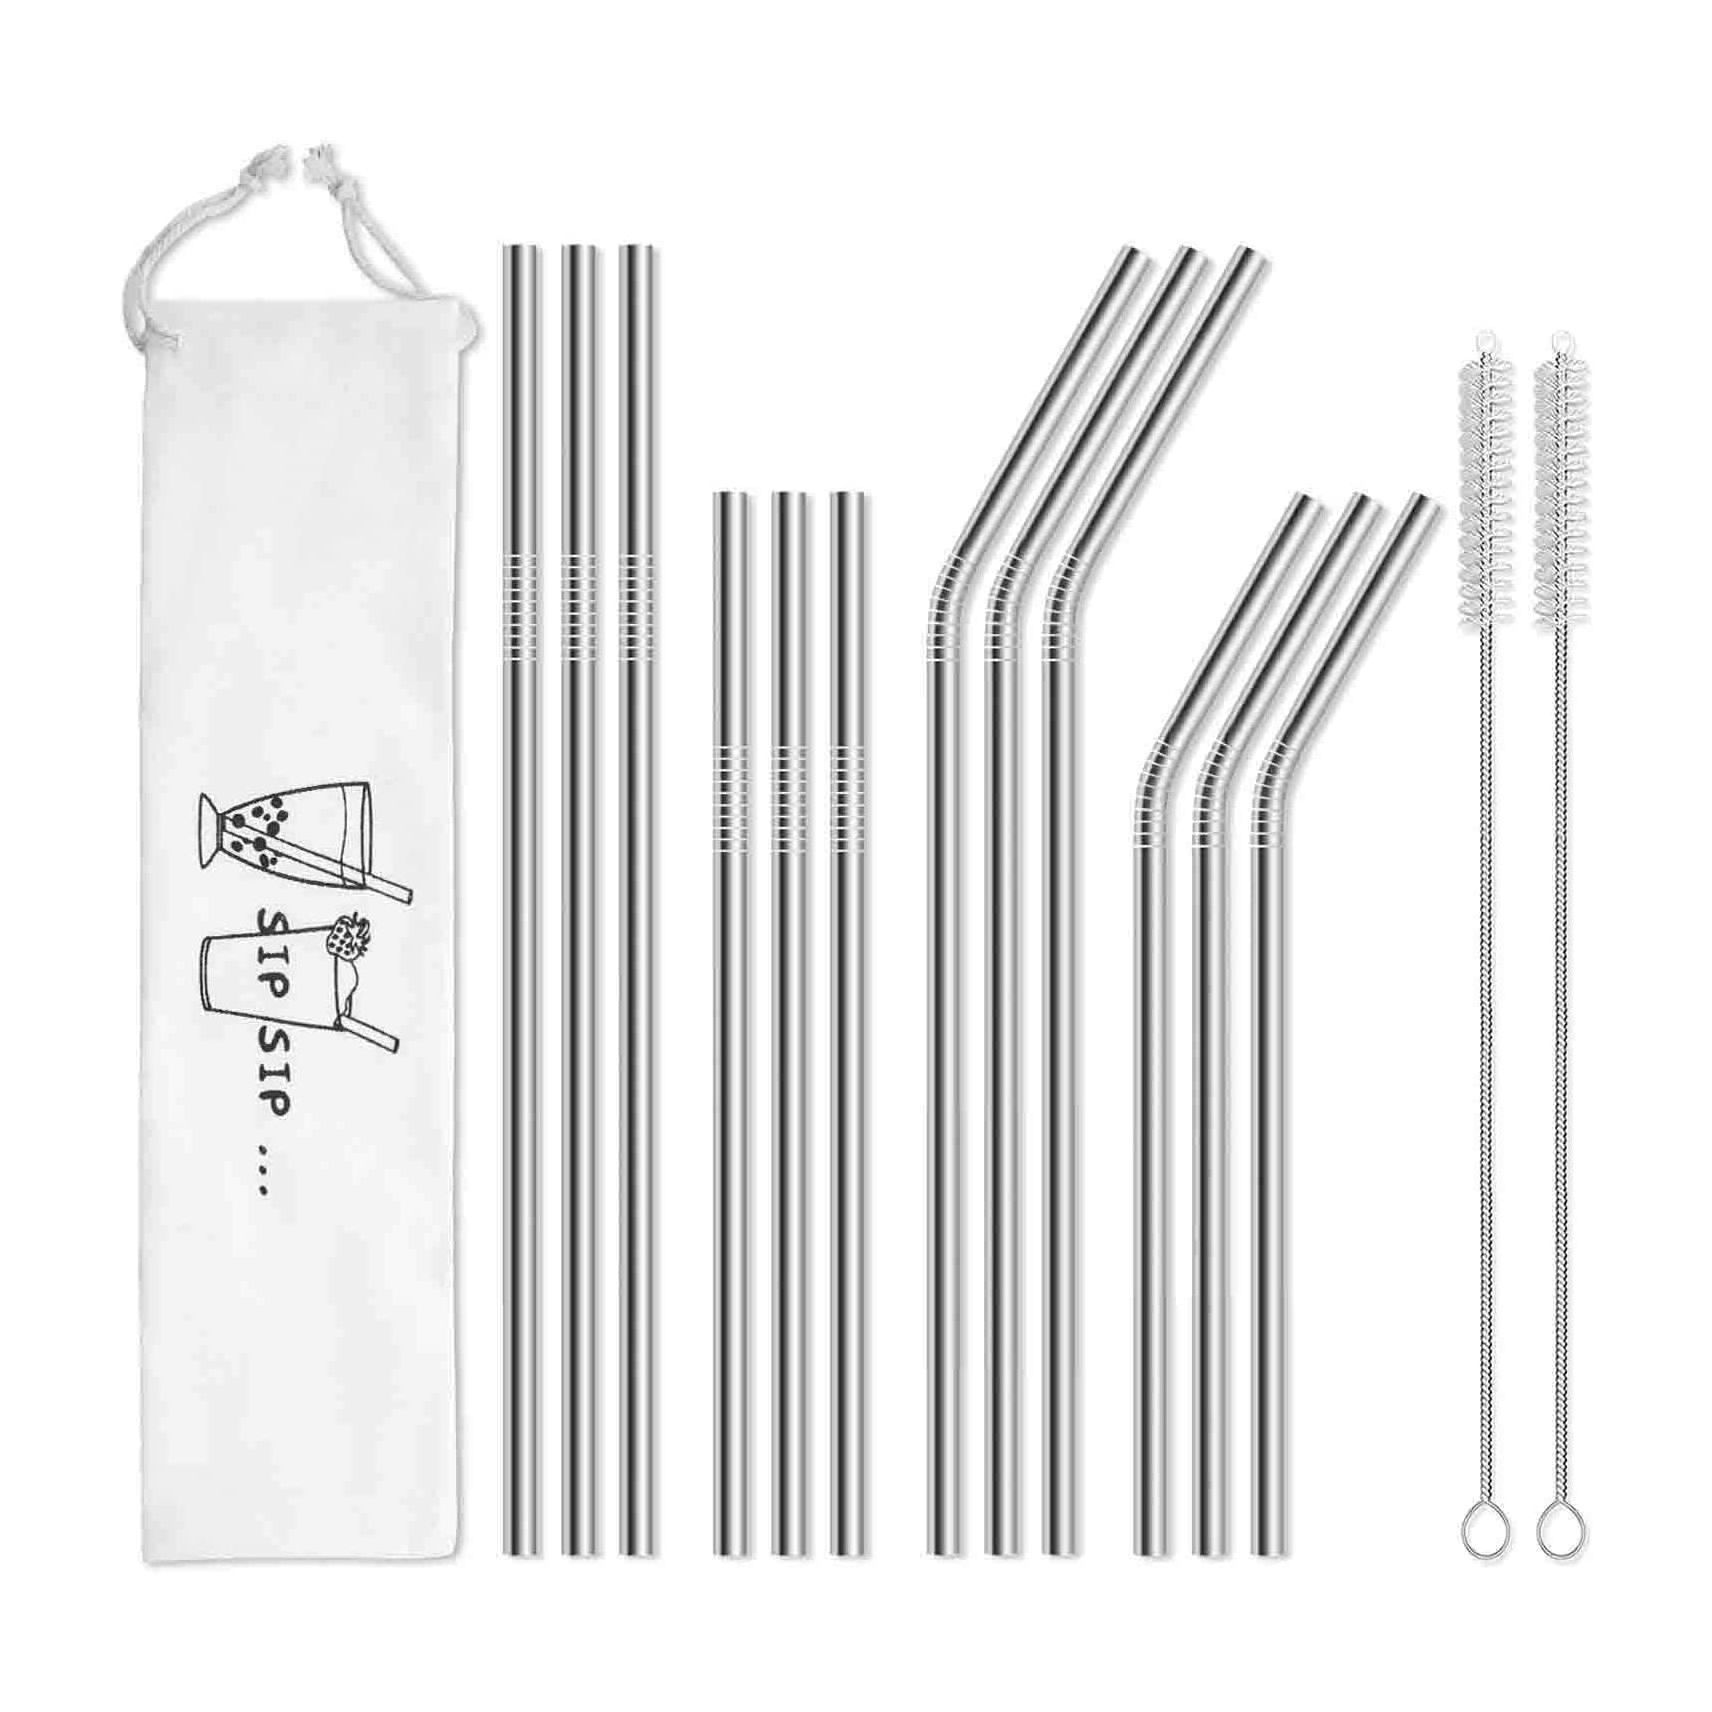 Teivio 12 Pack Metal Straws Cleaning Brush Small Glasses or Cups 5-inch Extra Short Reusable Stainless Steel Drink Straws for Cocktails Gold 